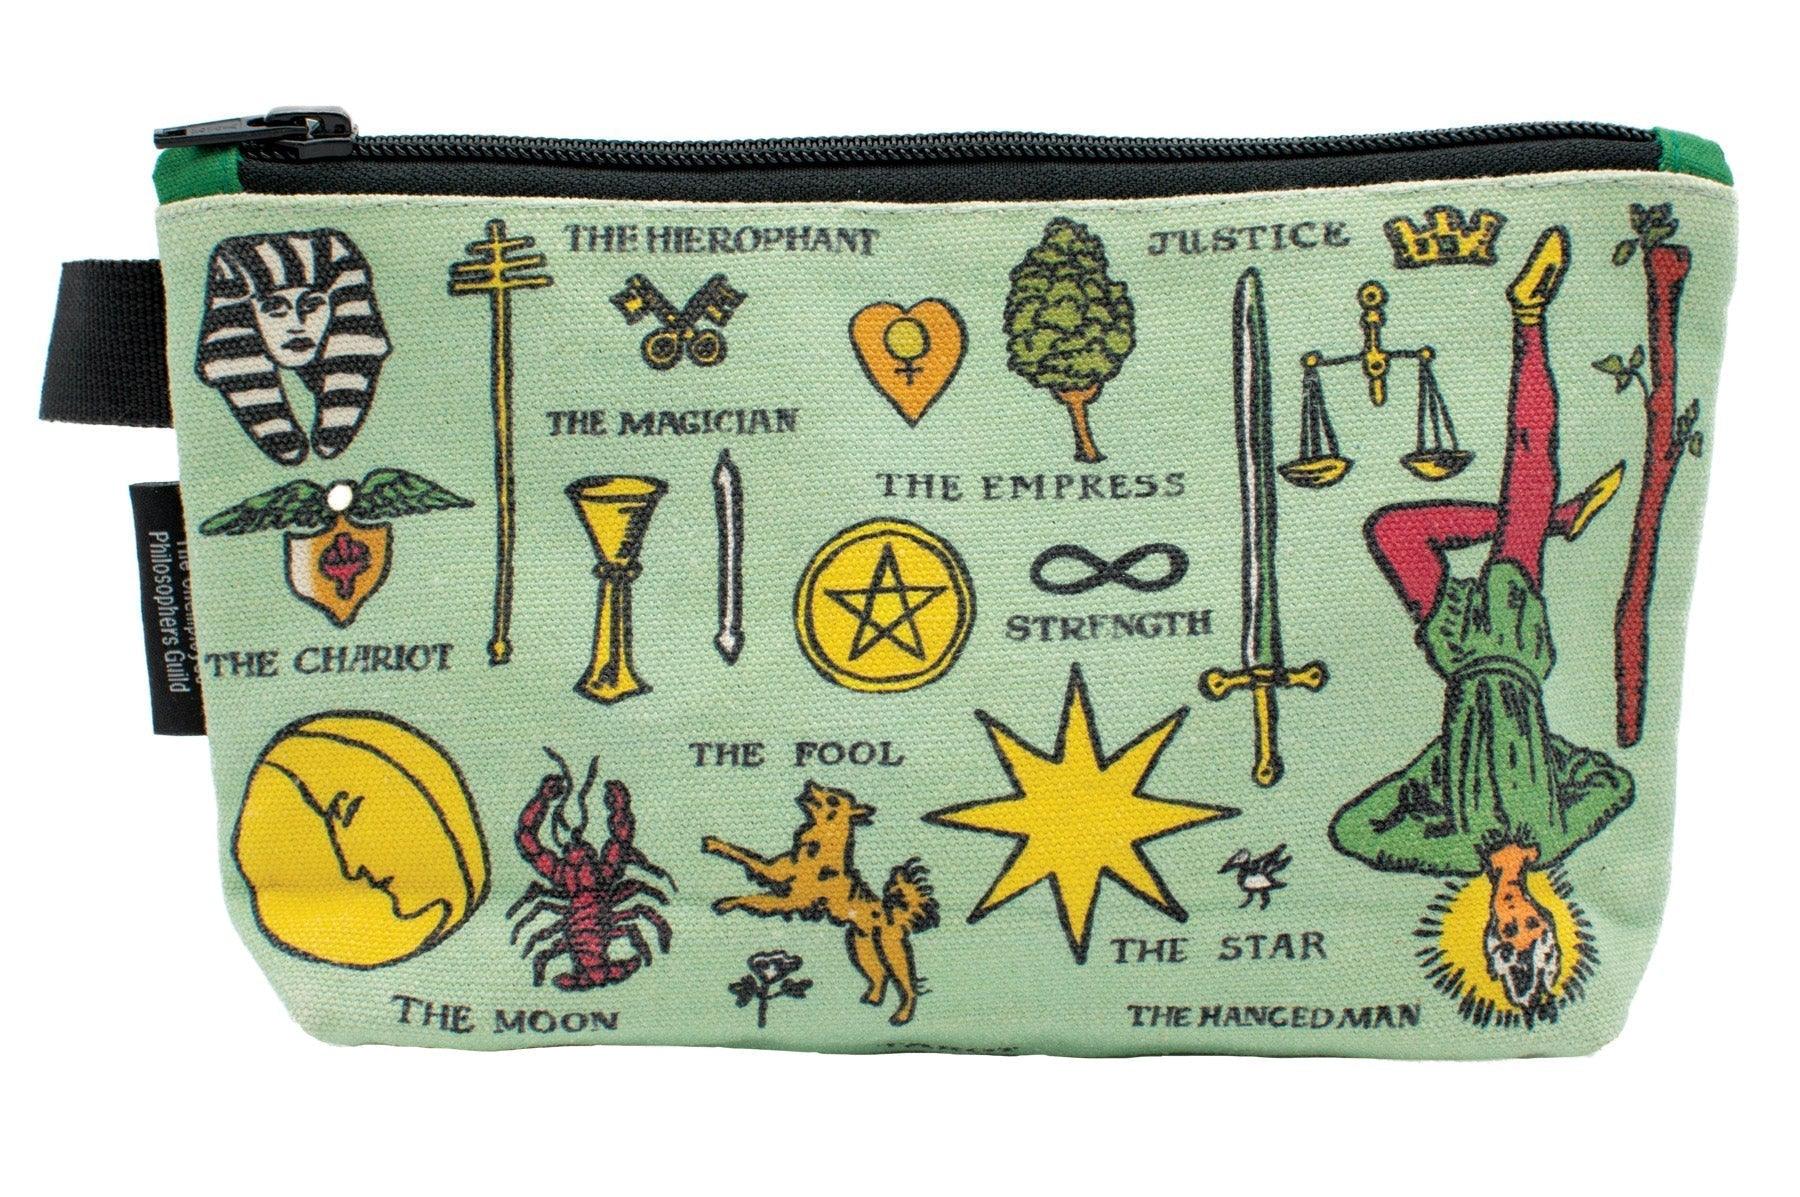 Product photo of Rider Waite Tarot Images Zipper Bag, a novelty gift manufactured by The Unemployed Philosophers Guild.